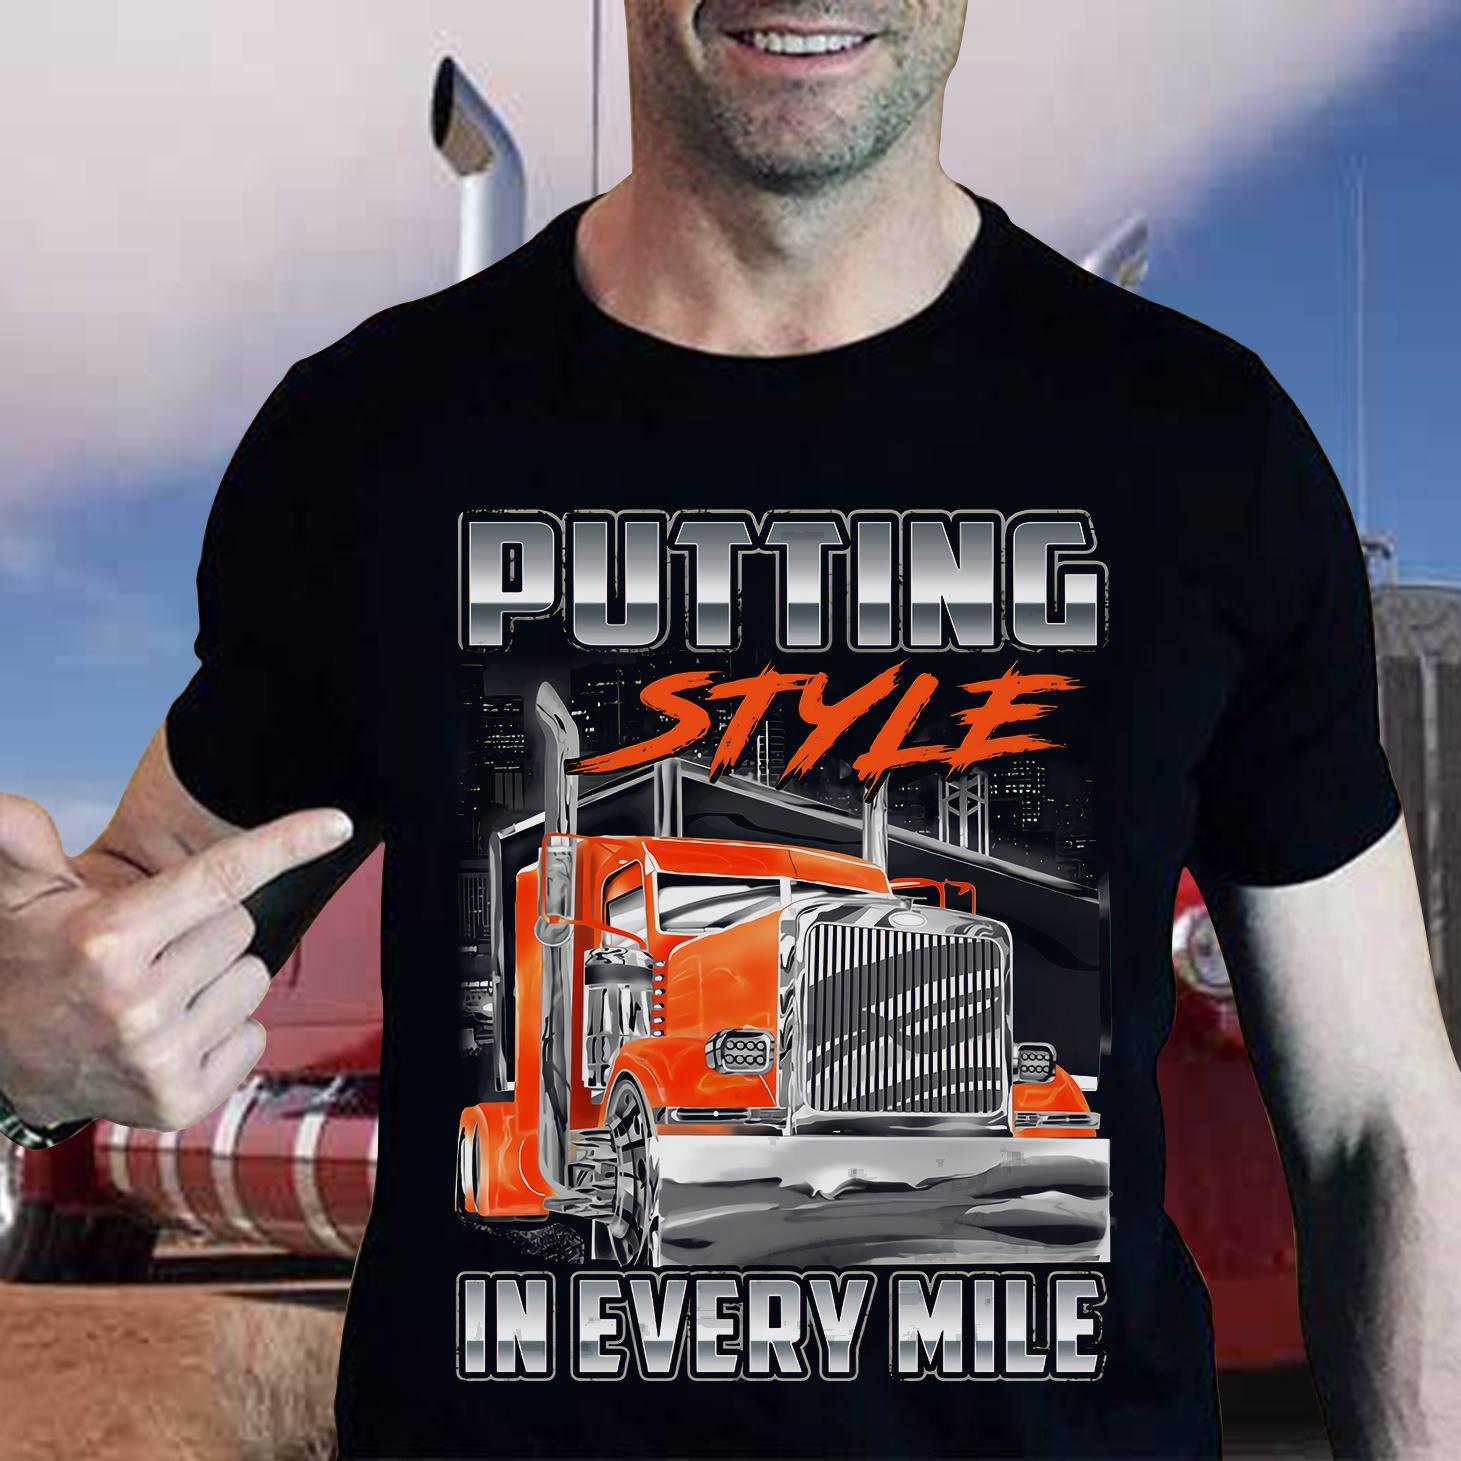 Putting style in every mile - Truck driver gift, trucker the job